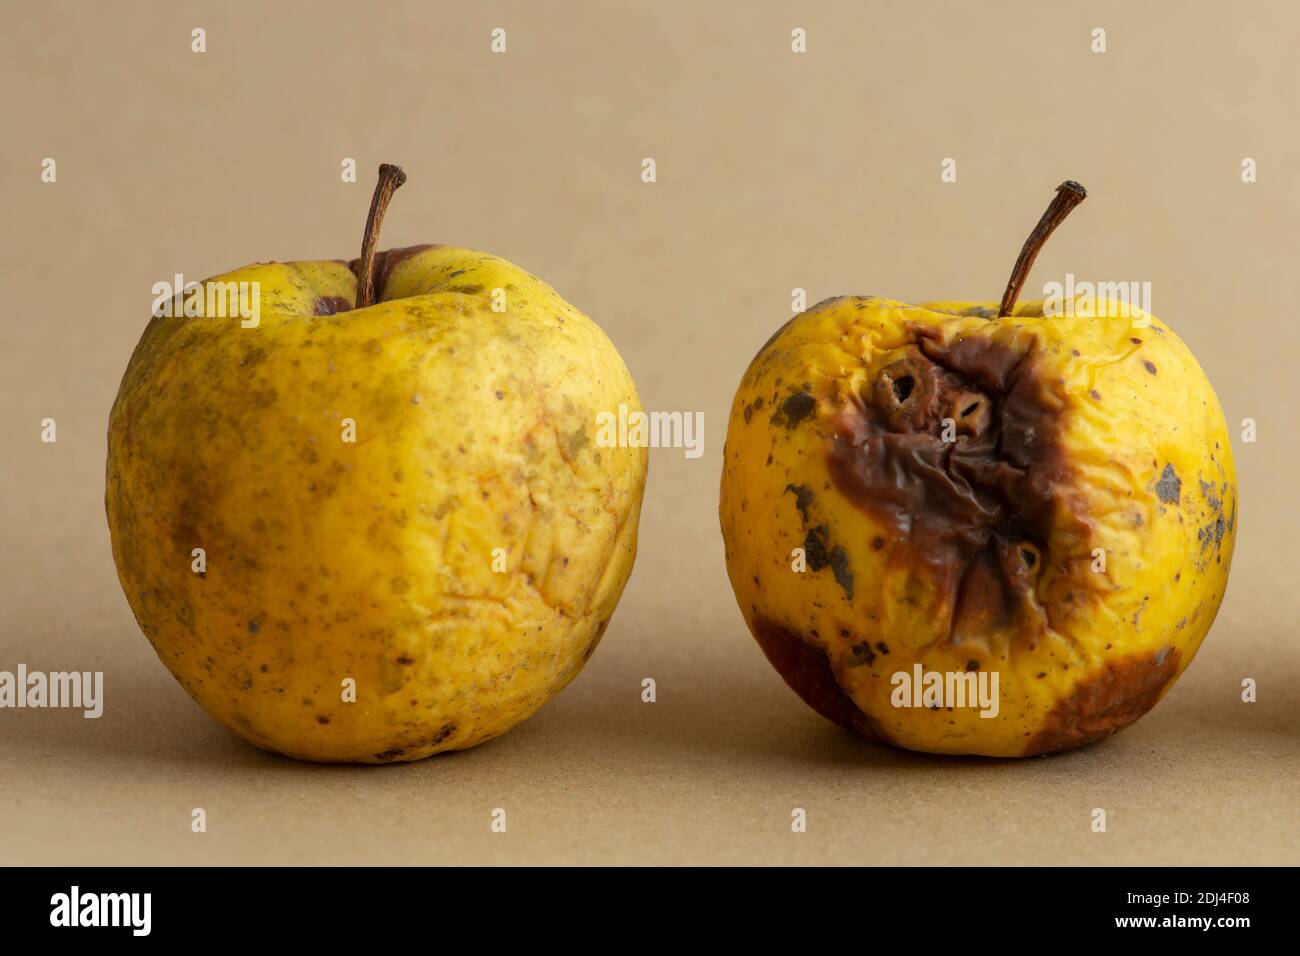 rotten, apple, fruit, bad, old, food, white, spoiled, organic, nature, isolated, natural, background, wrinkled, damaged, decay, fungus, yellow, red, Stock Photo